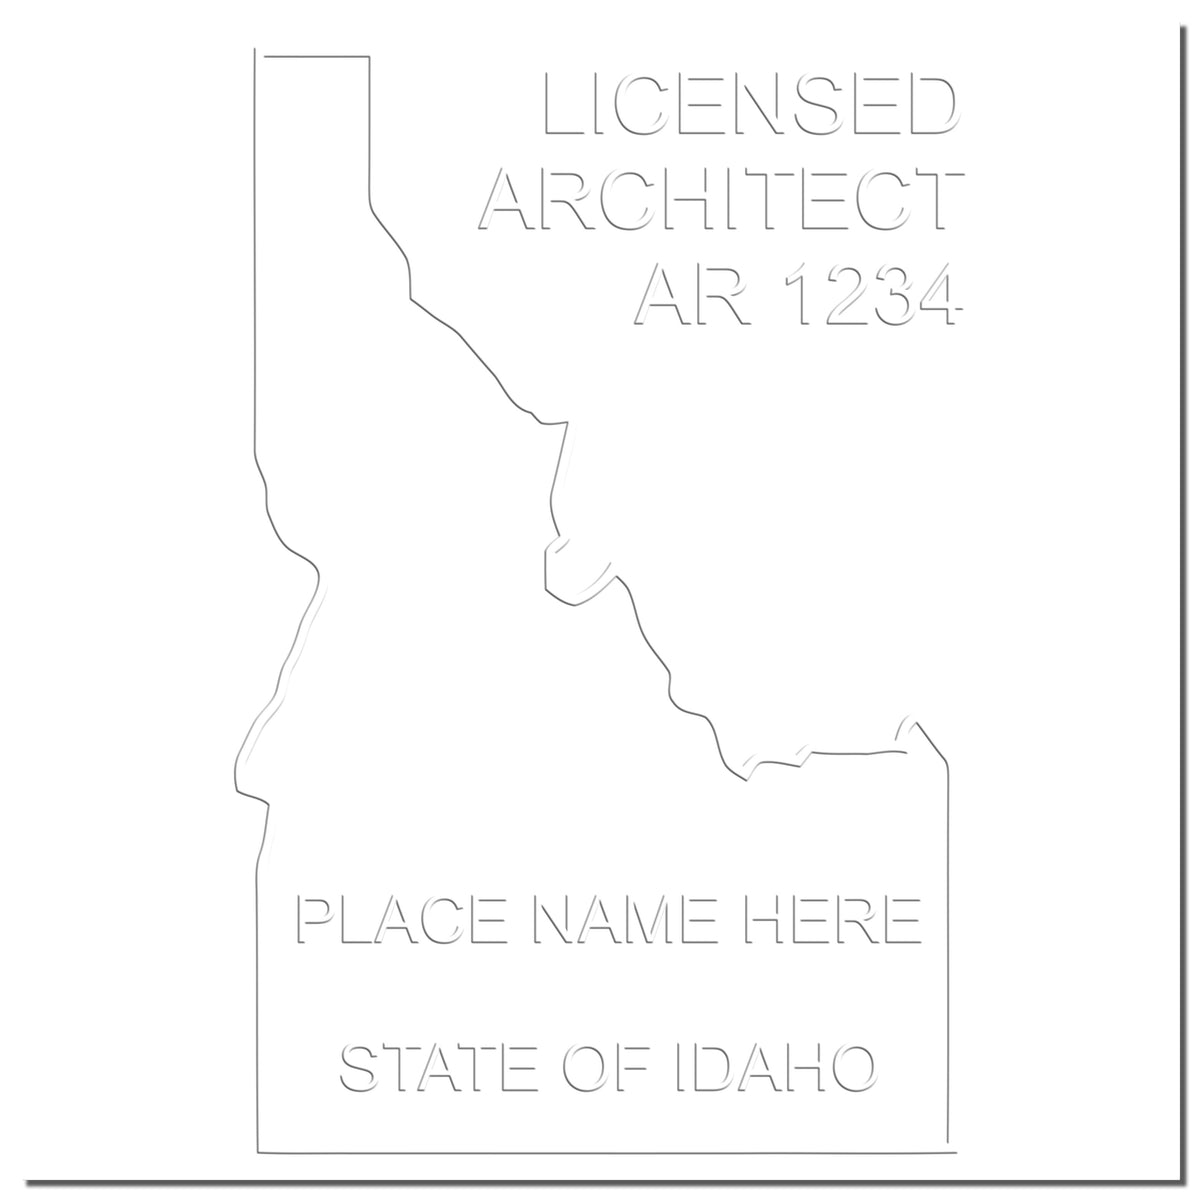 This paper is stamped with a sample imprint of the Gift Idaho Architect Seal, signifying its quality and reliability.